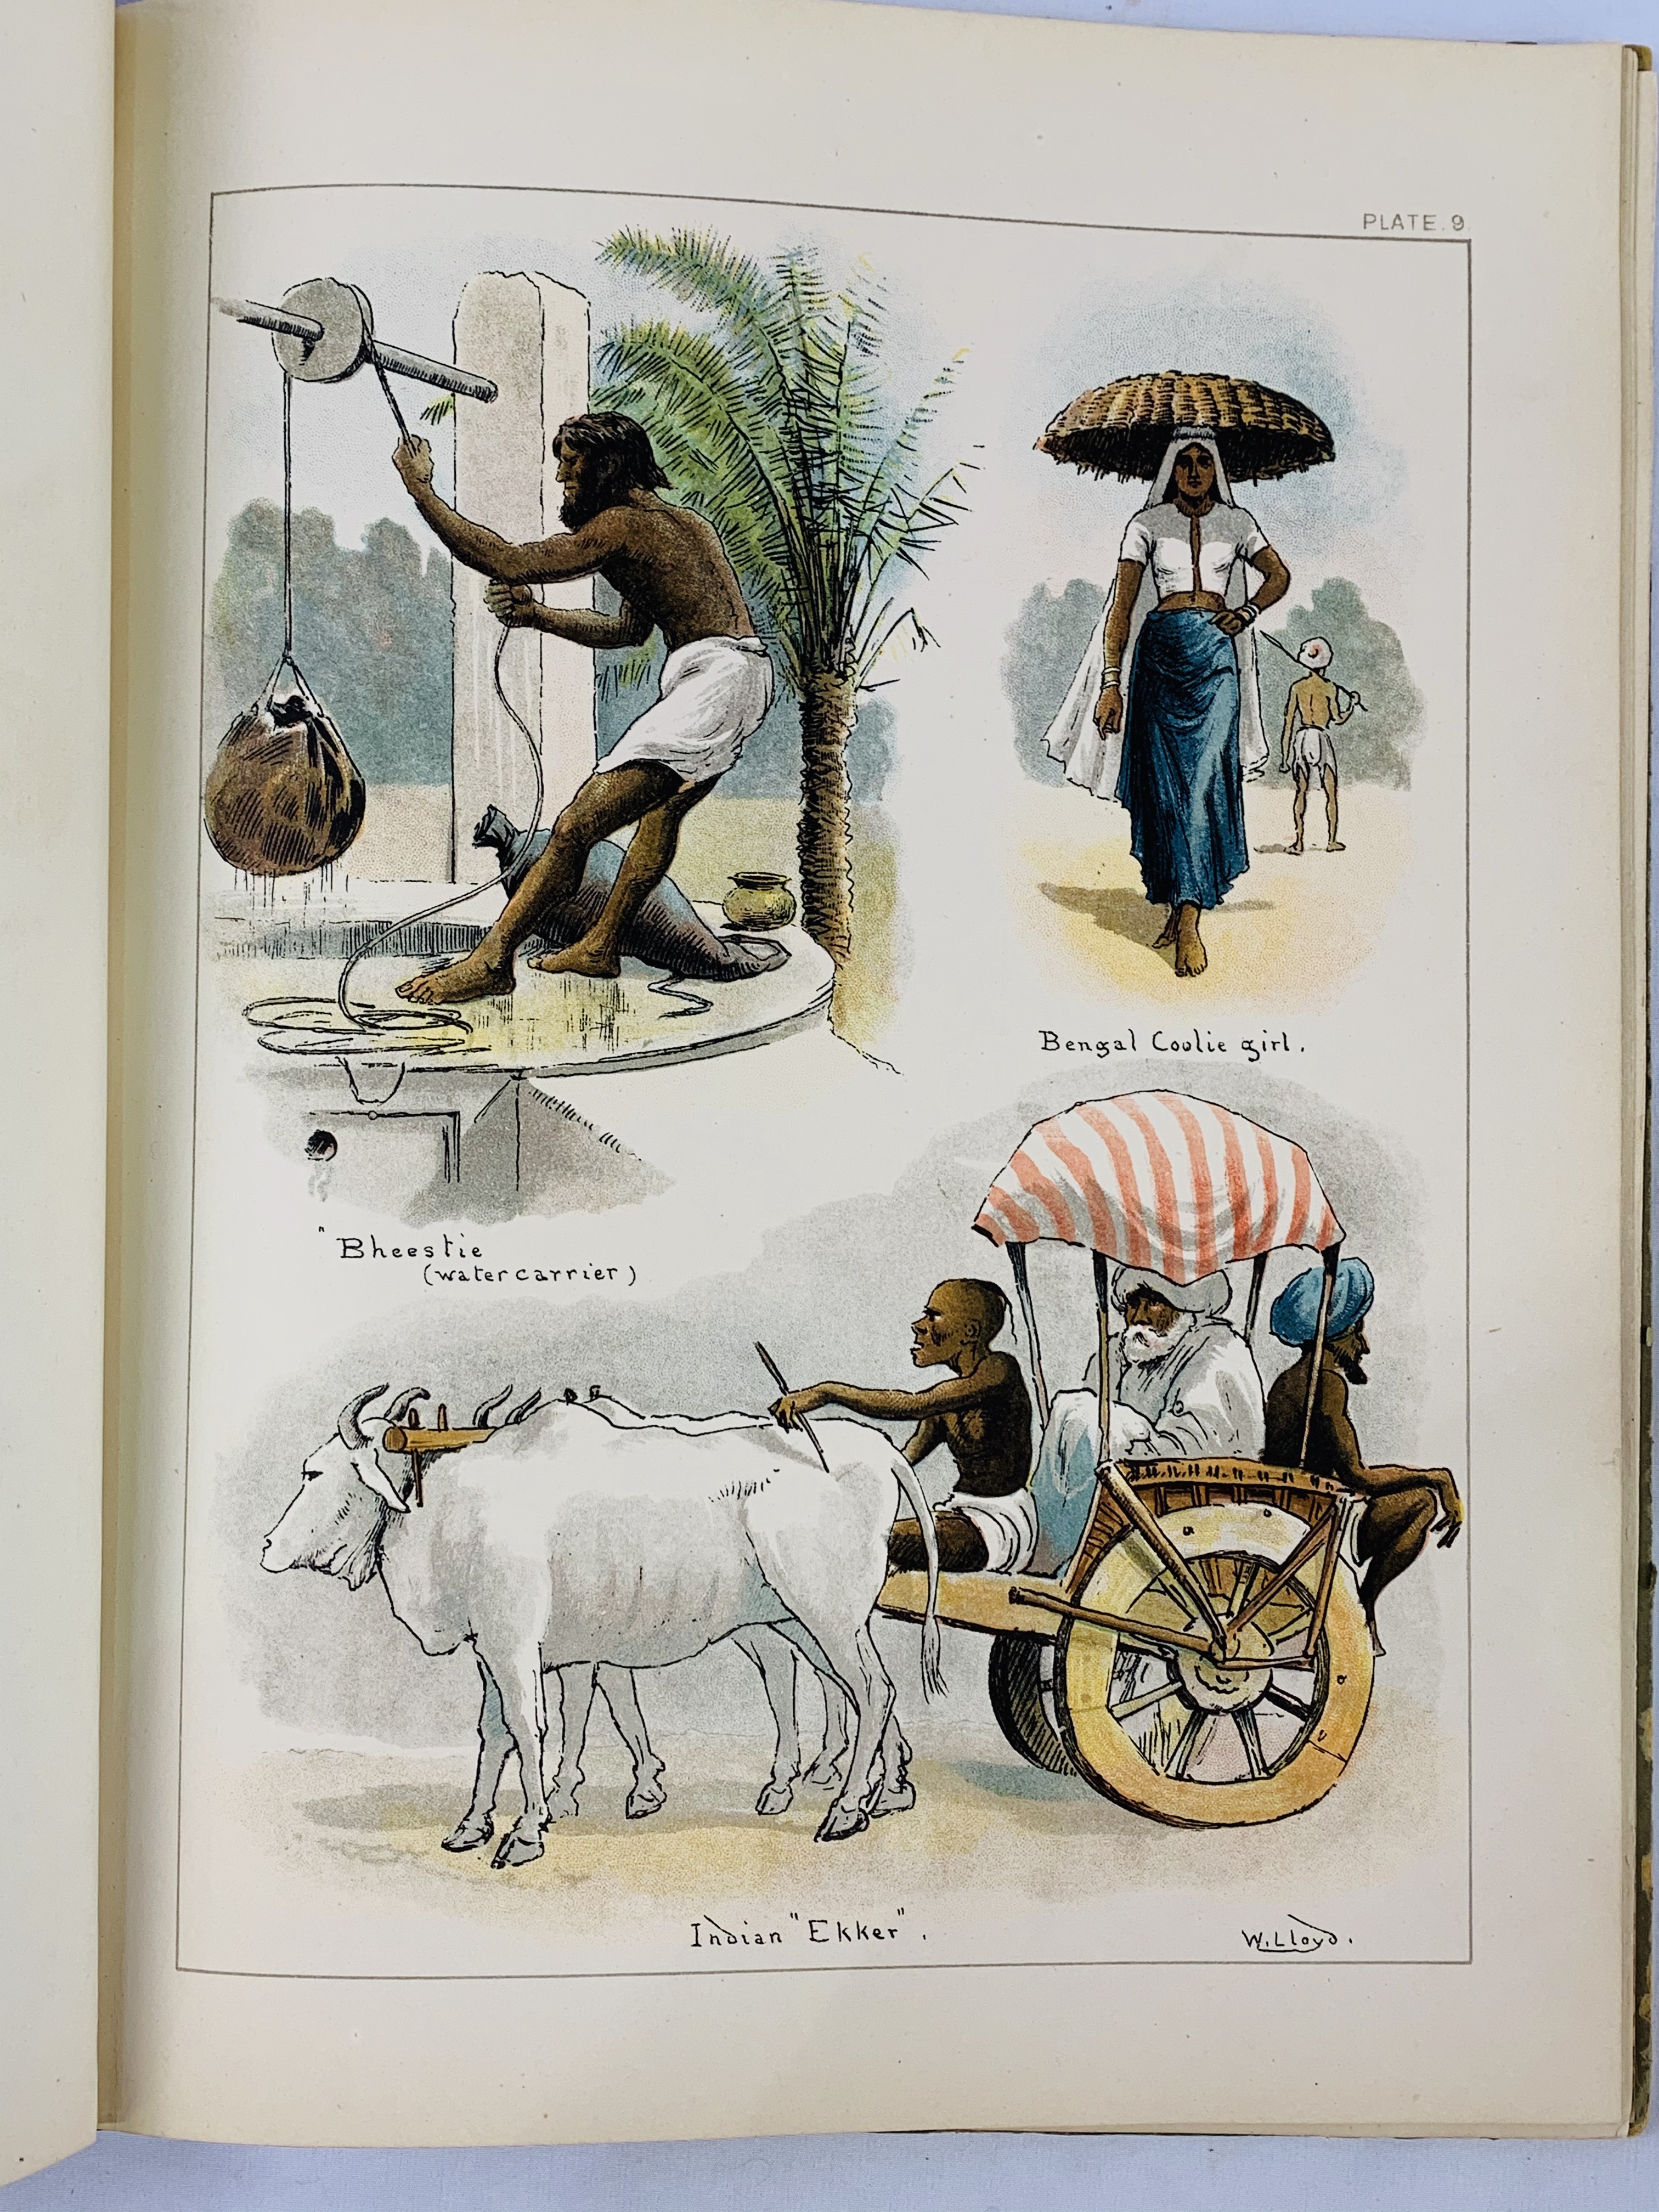 Lloyd's Sketches of Indian Life, published by Chapman and Hall, 1890 - Image 5 of 5